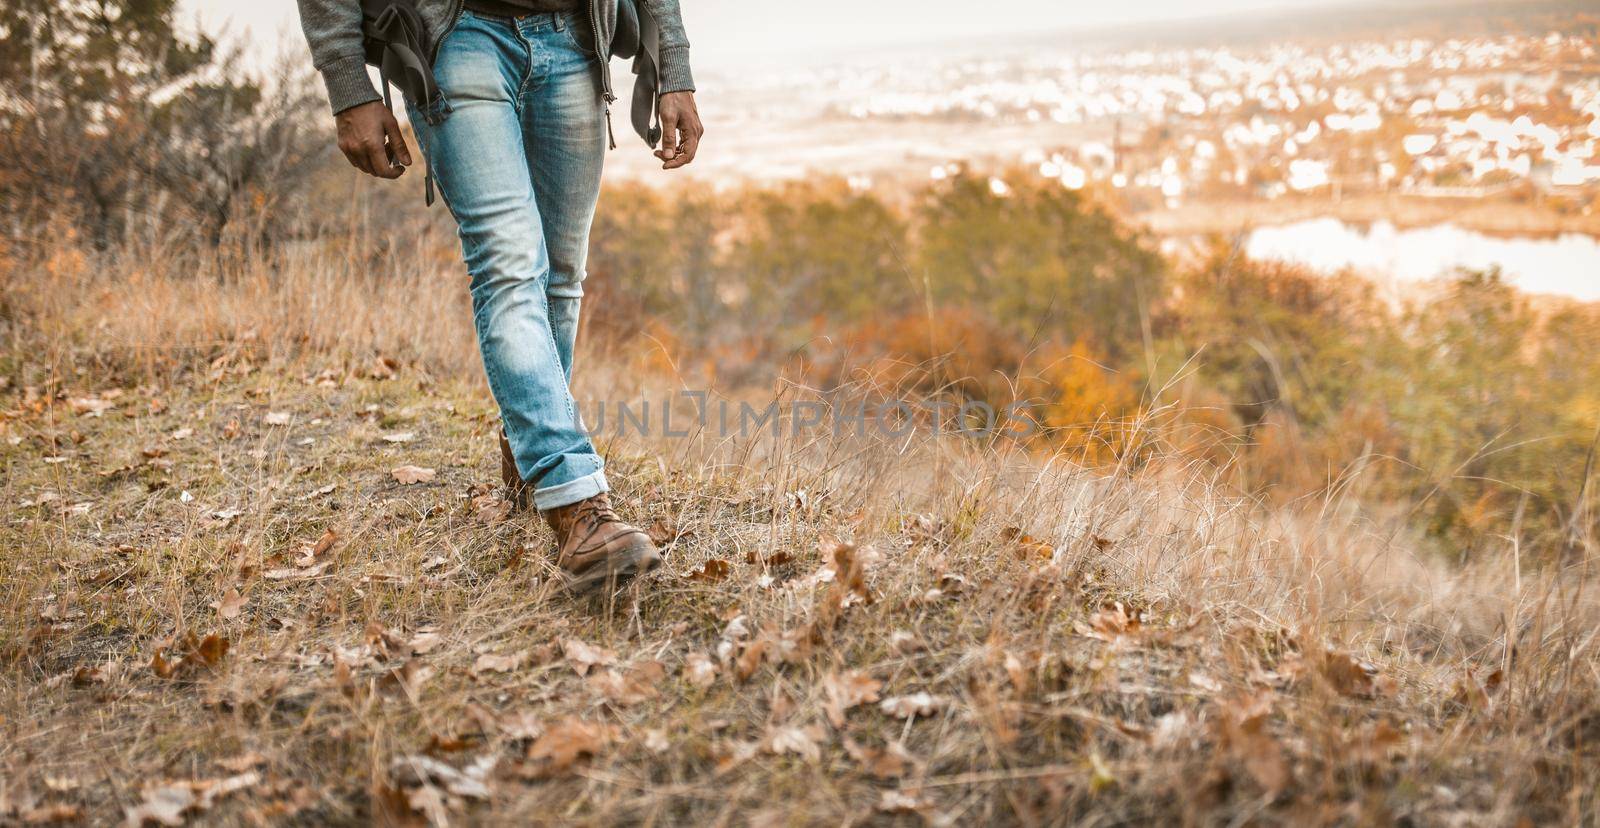 Man Hikes On A Hill, Young Man In Jeans With Backpack Is Walking Along The Autumn Grass With Beauty Landscape In Background, Close Up Of Men's Legs In Blue Jeans And Leather Boots.